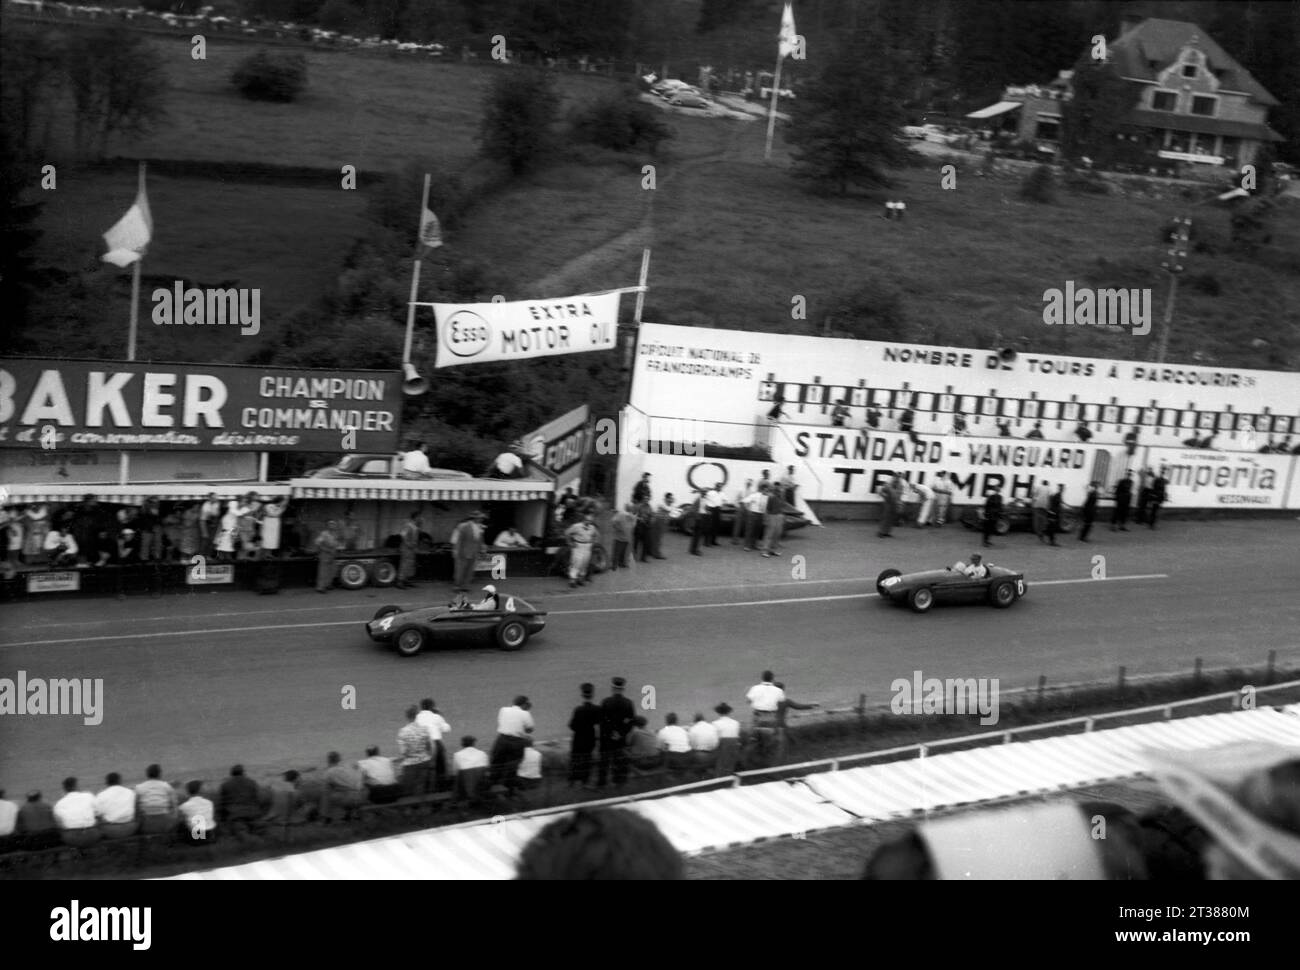 Italian Formula One driver Giuseppe 'Nino' Farina (Ferrari 553) leading Argentine Juan Manuel Fangio (Maserati 250 F) at the end of the second lap of the 1954 Belgian Grand Prix at the Spa-Francorchamps circuit. The 36-lap race was won by Fangio followed by Maurice Trintignant and Stirling Moss. The circuit lenght was 14.120 km, and the race was 508.320 km. Fangio won the 1954 World Championship. Stock Photo